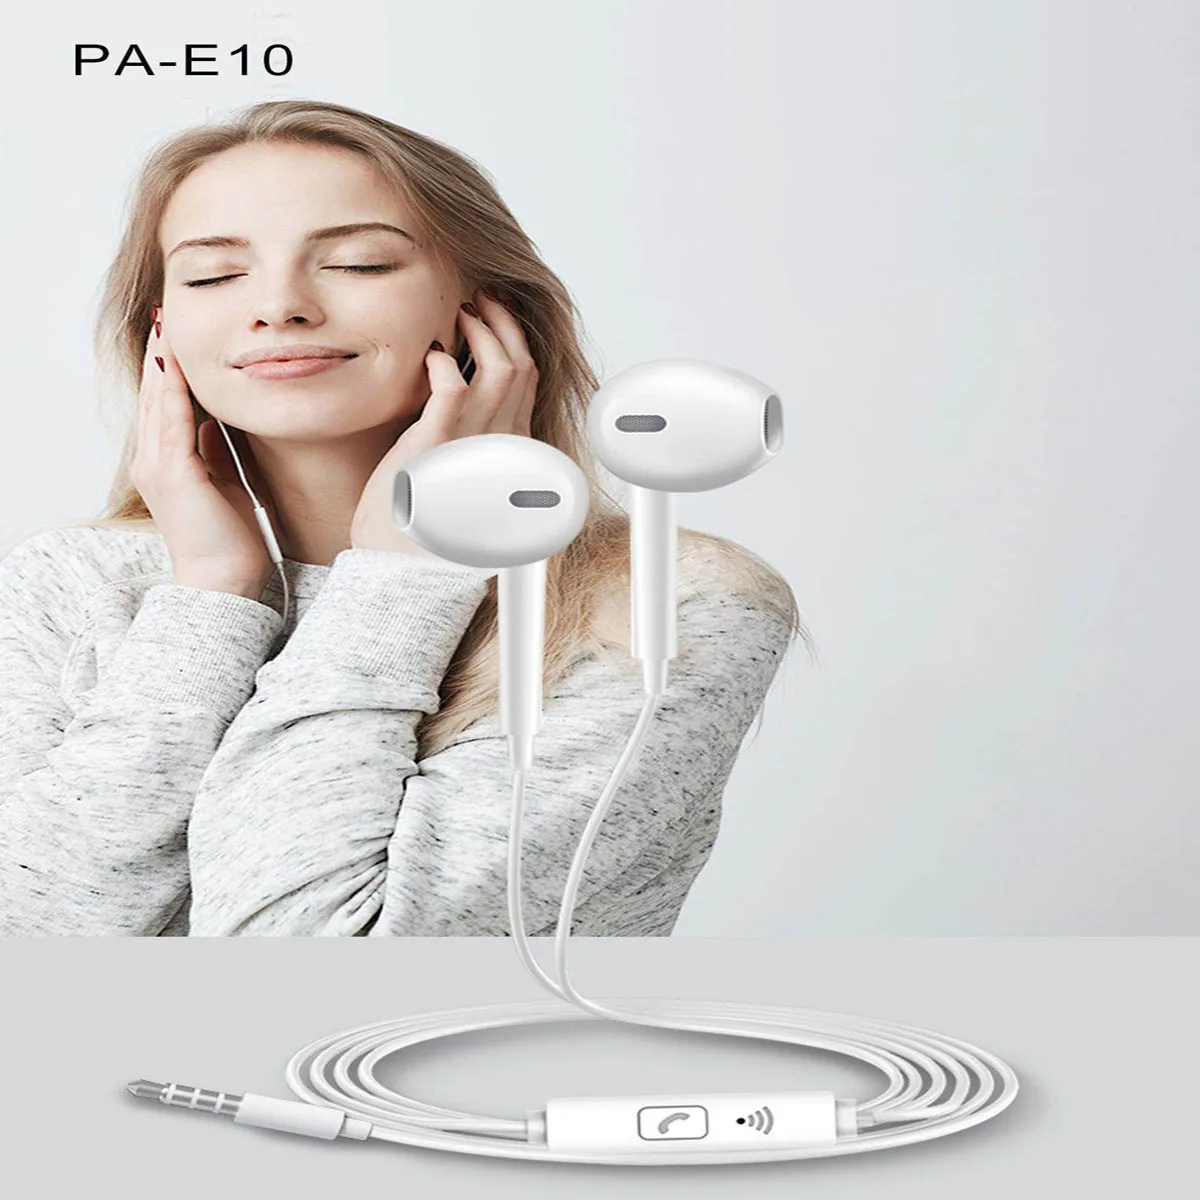 

PA E10 Huawei Honor AM115 Headset with 3.5mm in Ear Earbuds Earphone Speaker Wired Controller for Huawei P10 P9 P8 Mate9 Honor 8